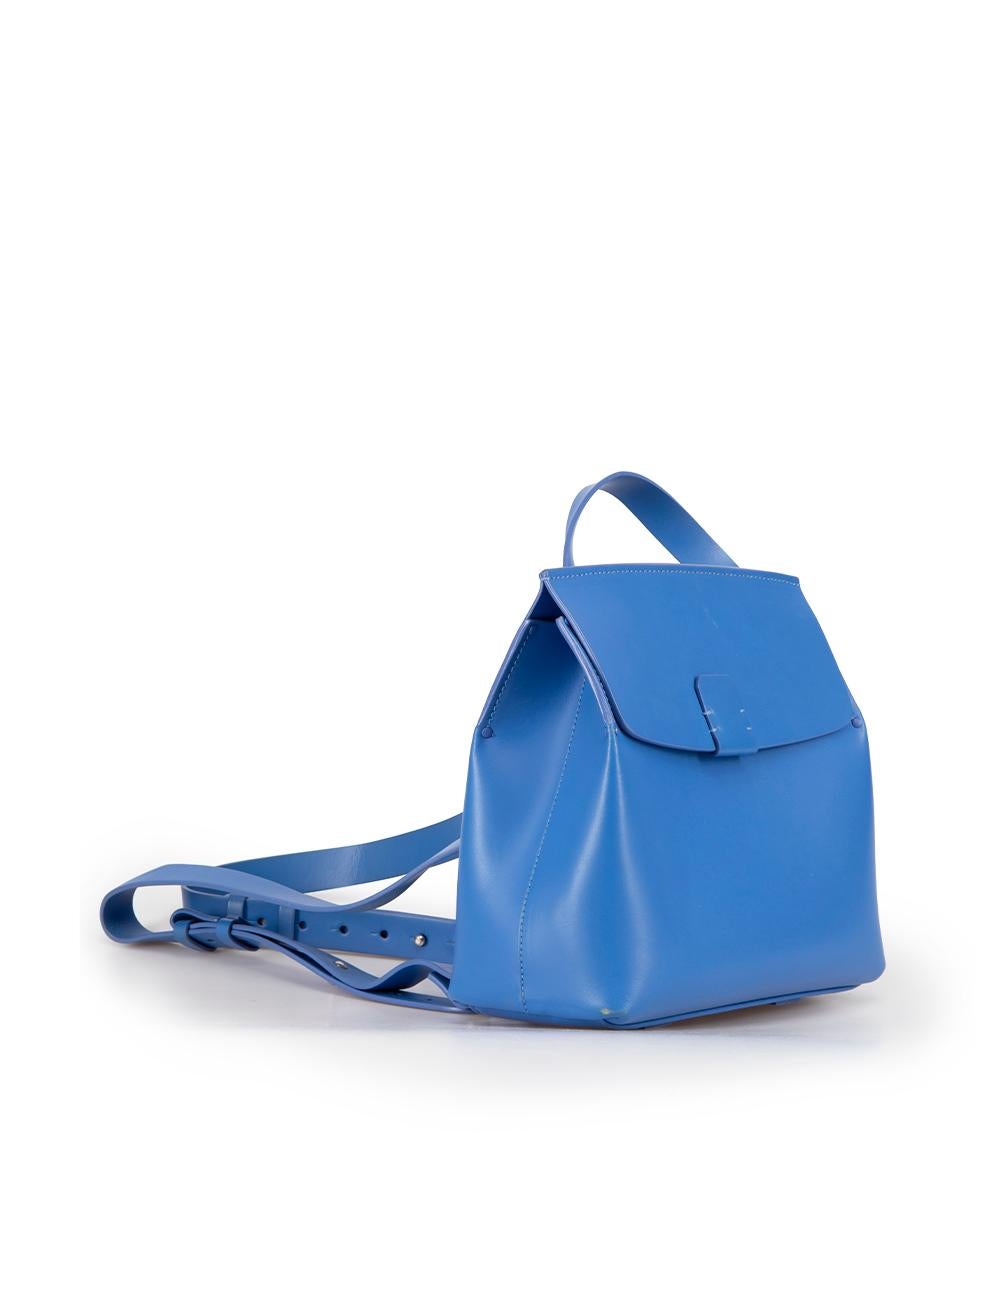 CONDITION is Good. Minor wear to backpack is evident. Light scuffing to outer leather, minor creasing to top flap and scuffing to outer corners on this used Nico Giani designer resale item.
 
Details
Electric blue
Leather
Medium backpack
1x Top